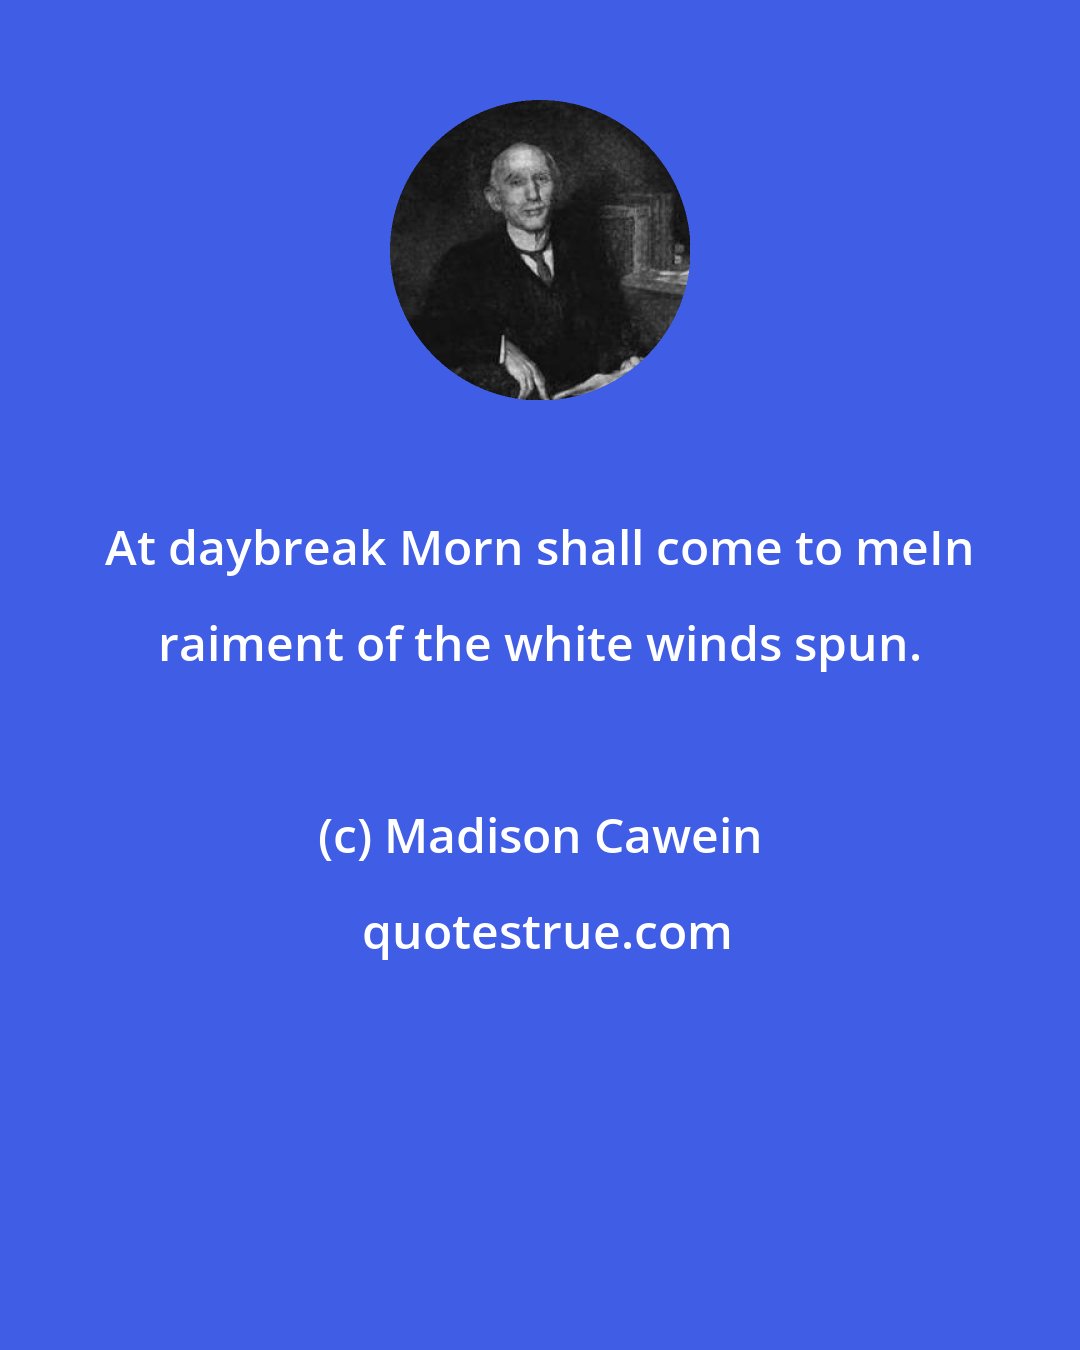 Madison Cawein: At daybreak Morn shall come to meIn raiment of the white winds spun.